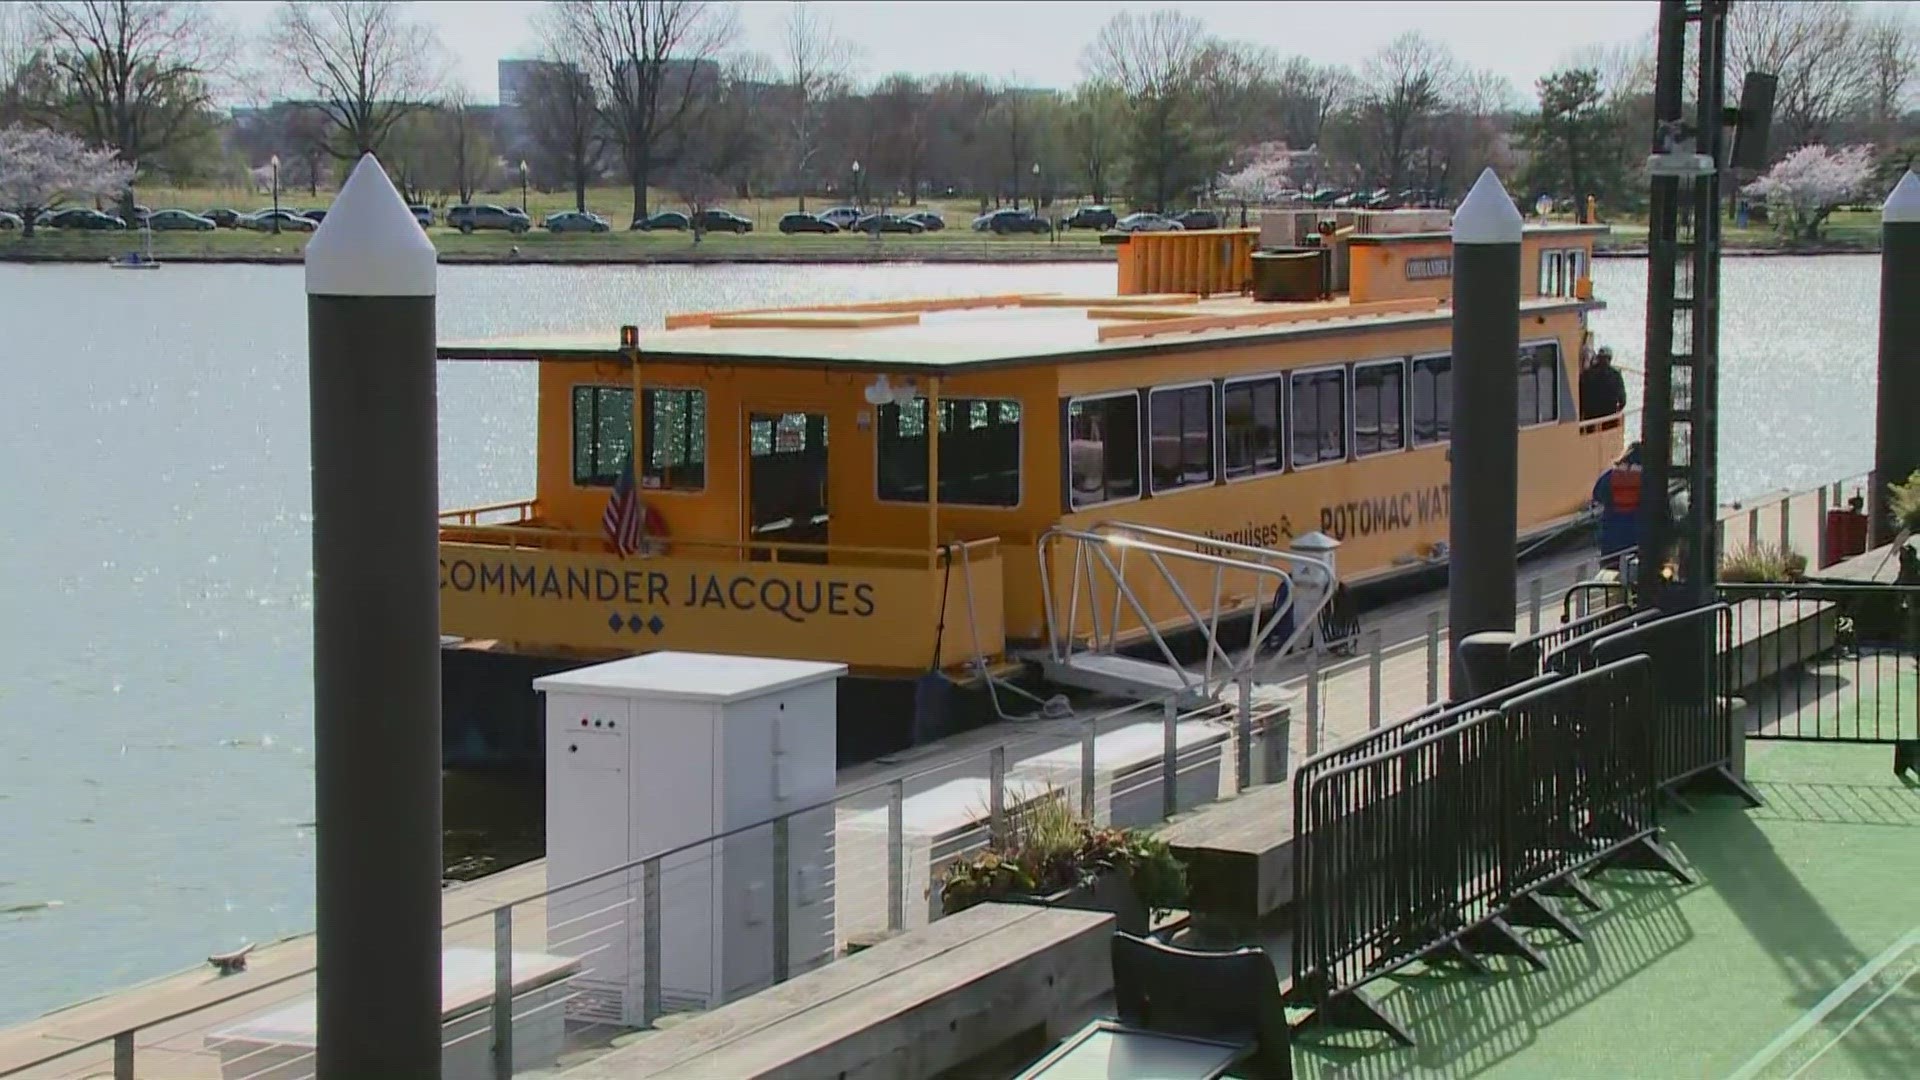 Meteorologist Makayla Lucero is going to take a water taxi to view DC's cherry blossoms.